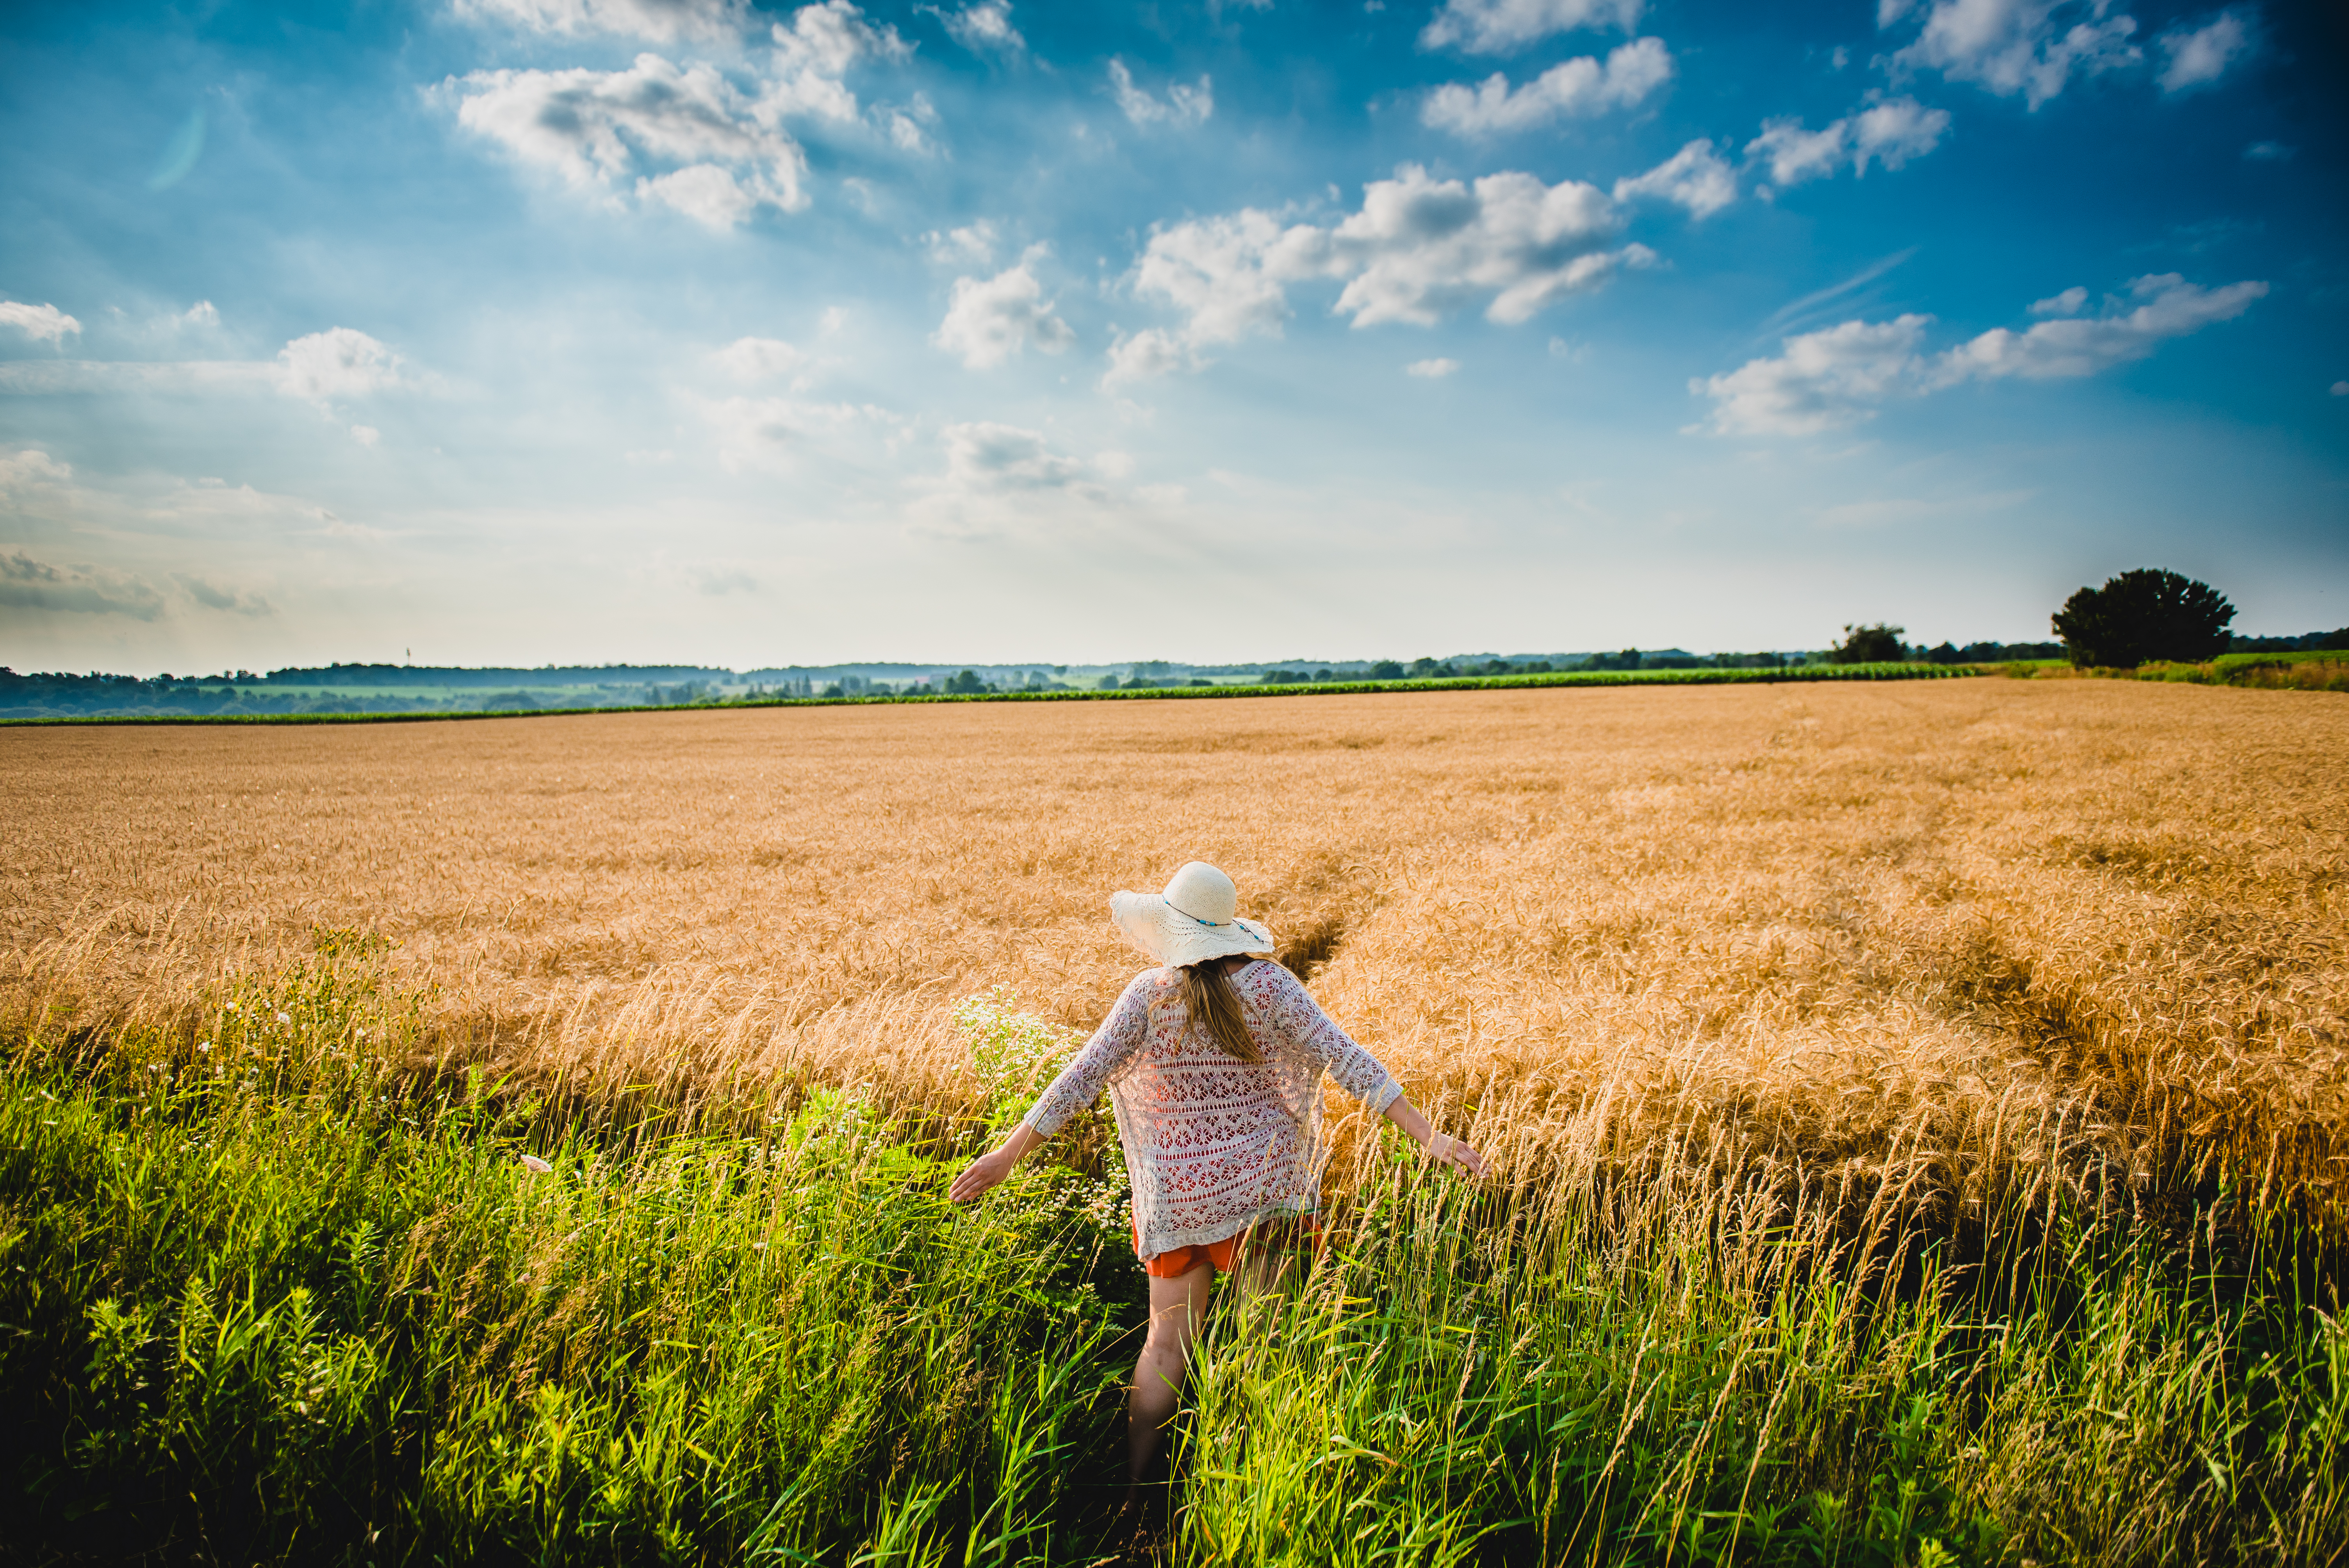 young child walking into a field of wheat